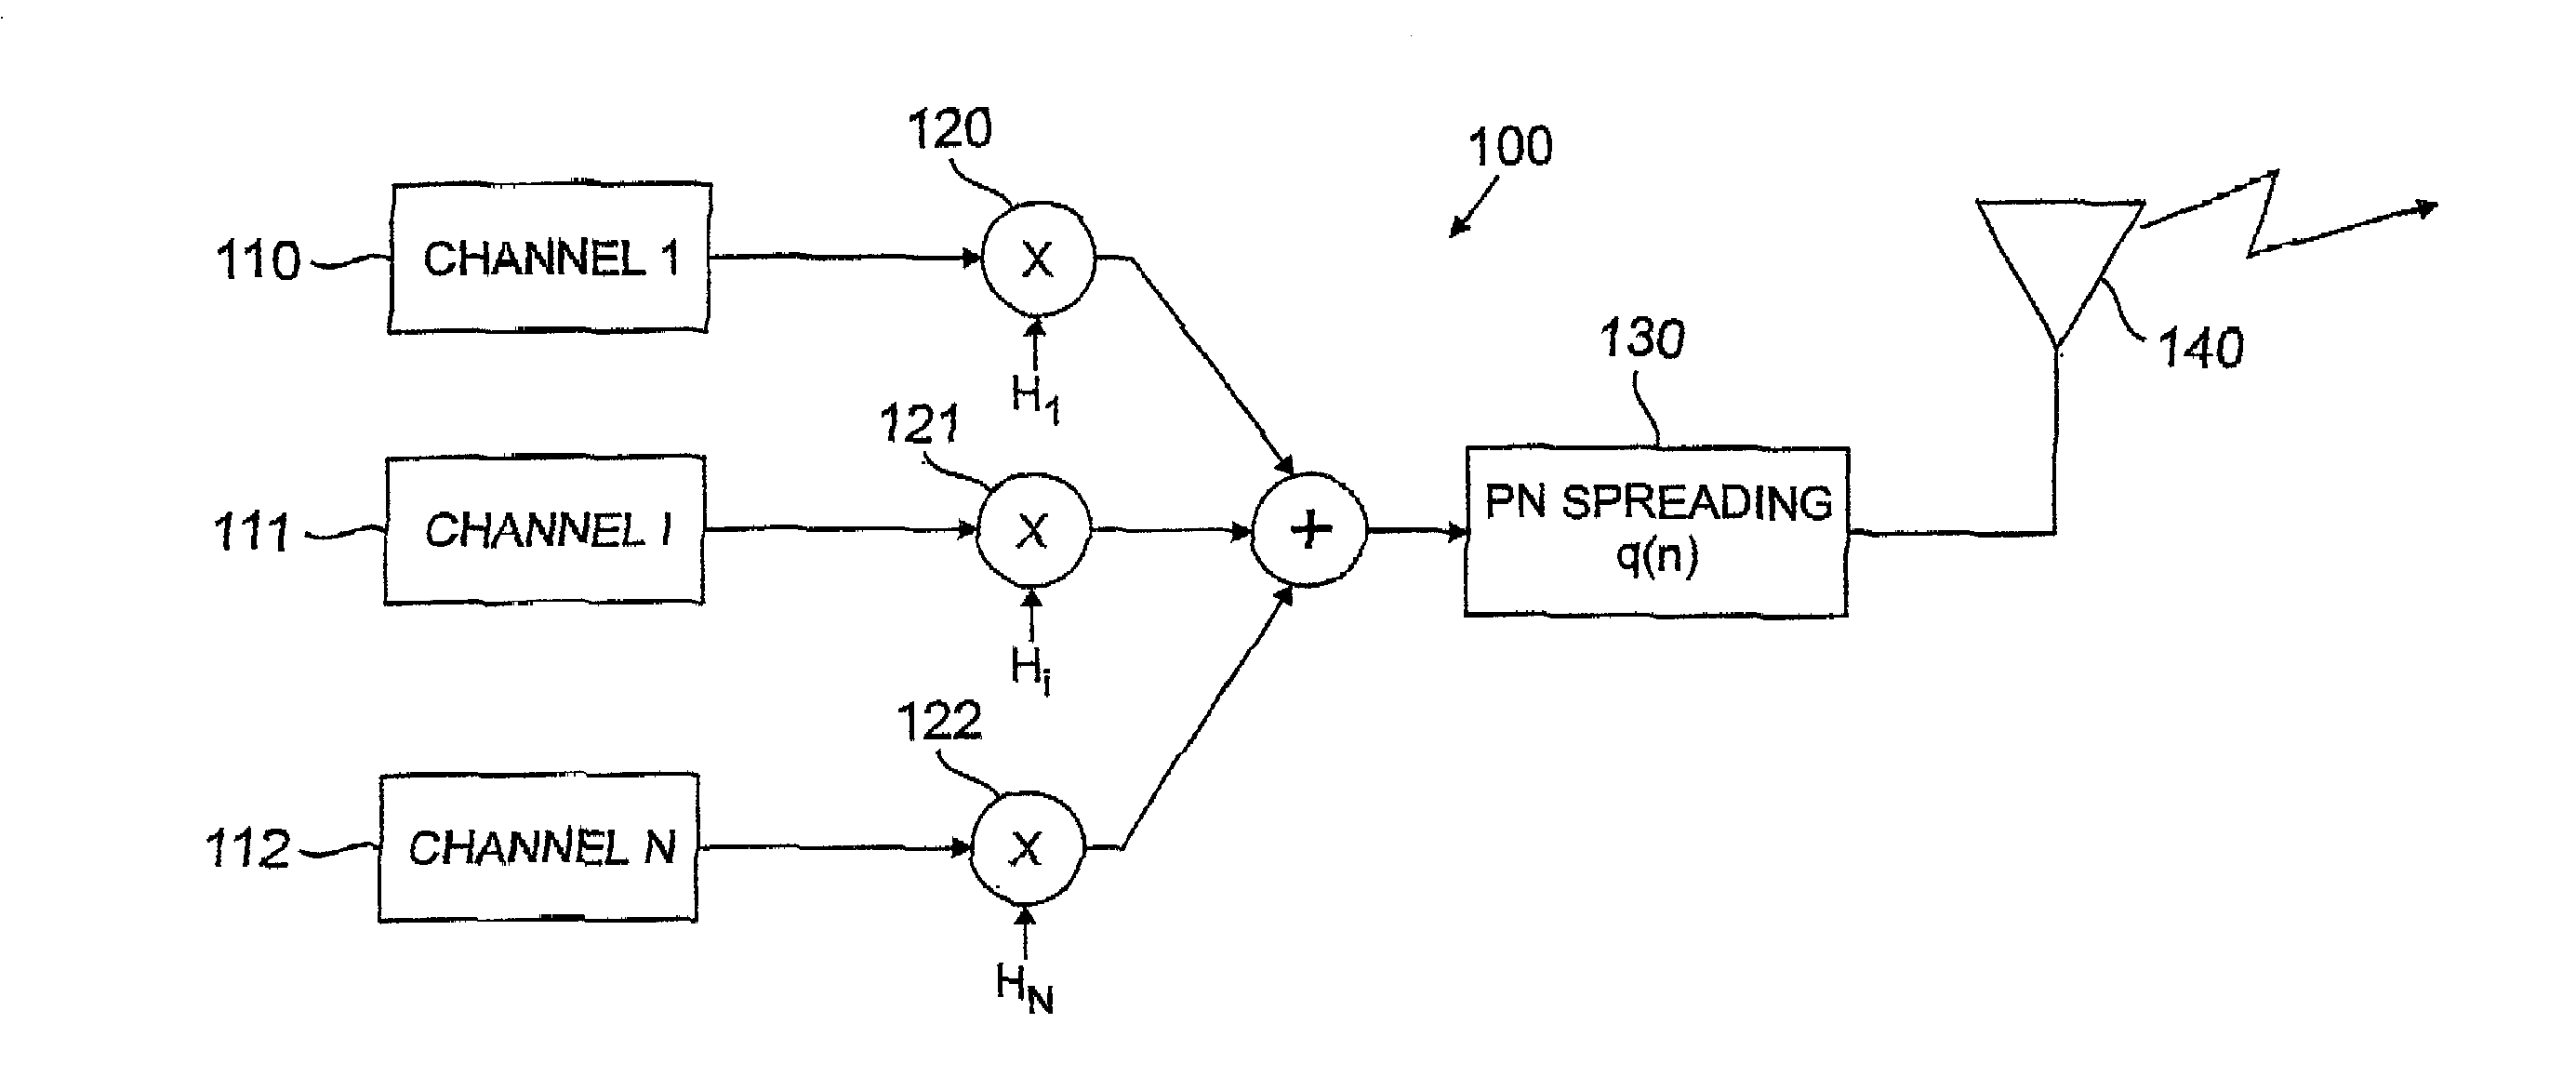 Method and apparatus for achieving channel variability in spread spectrum communication systems